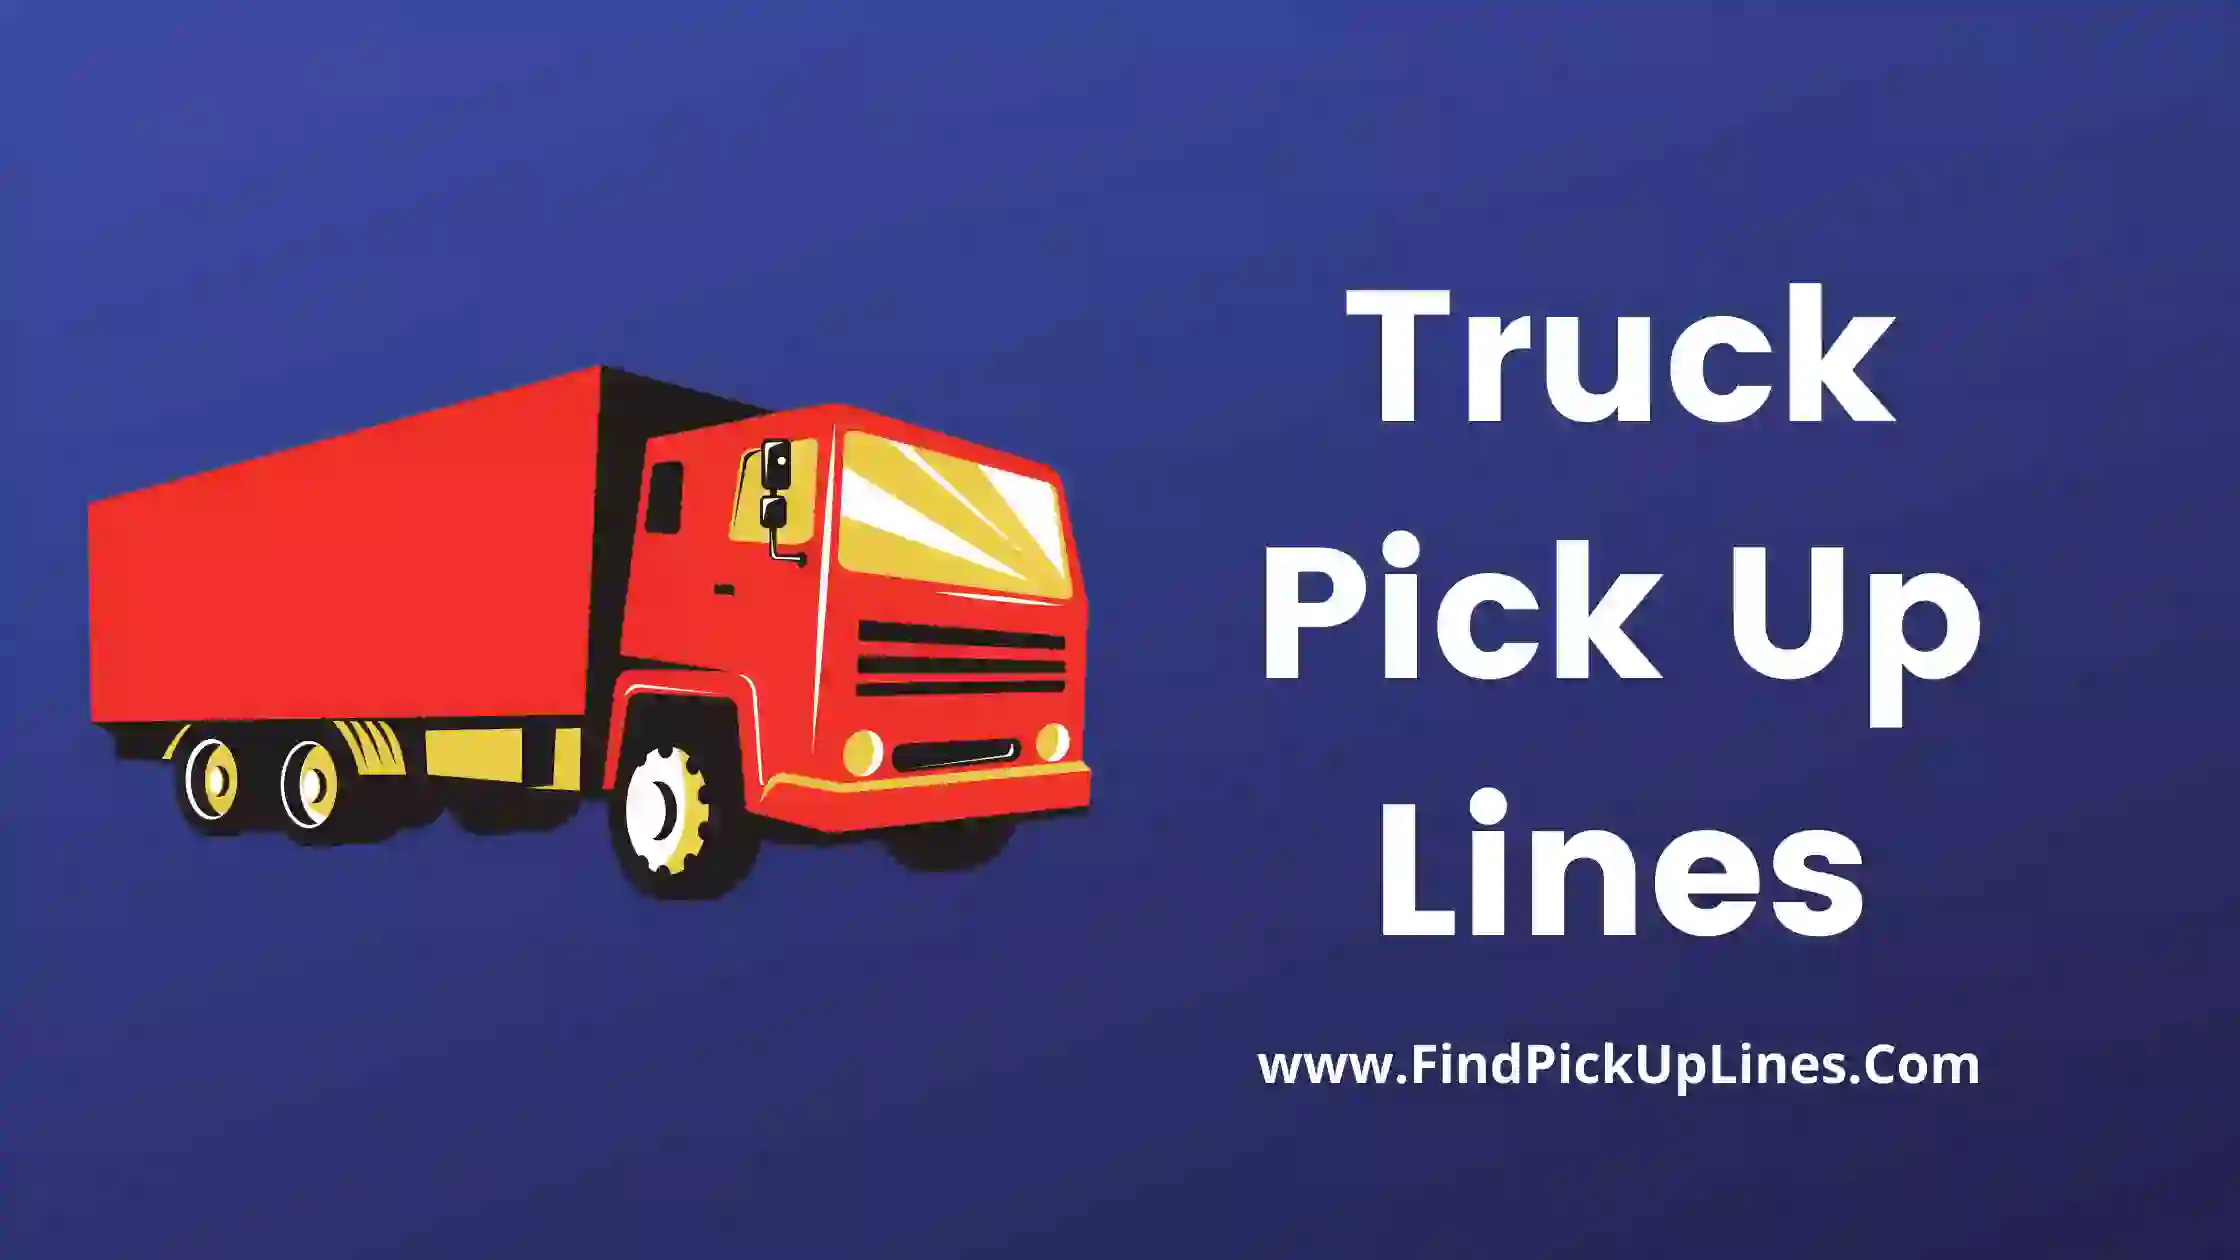 Truck Pick Up Lines